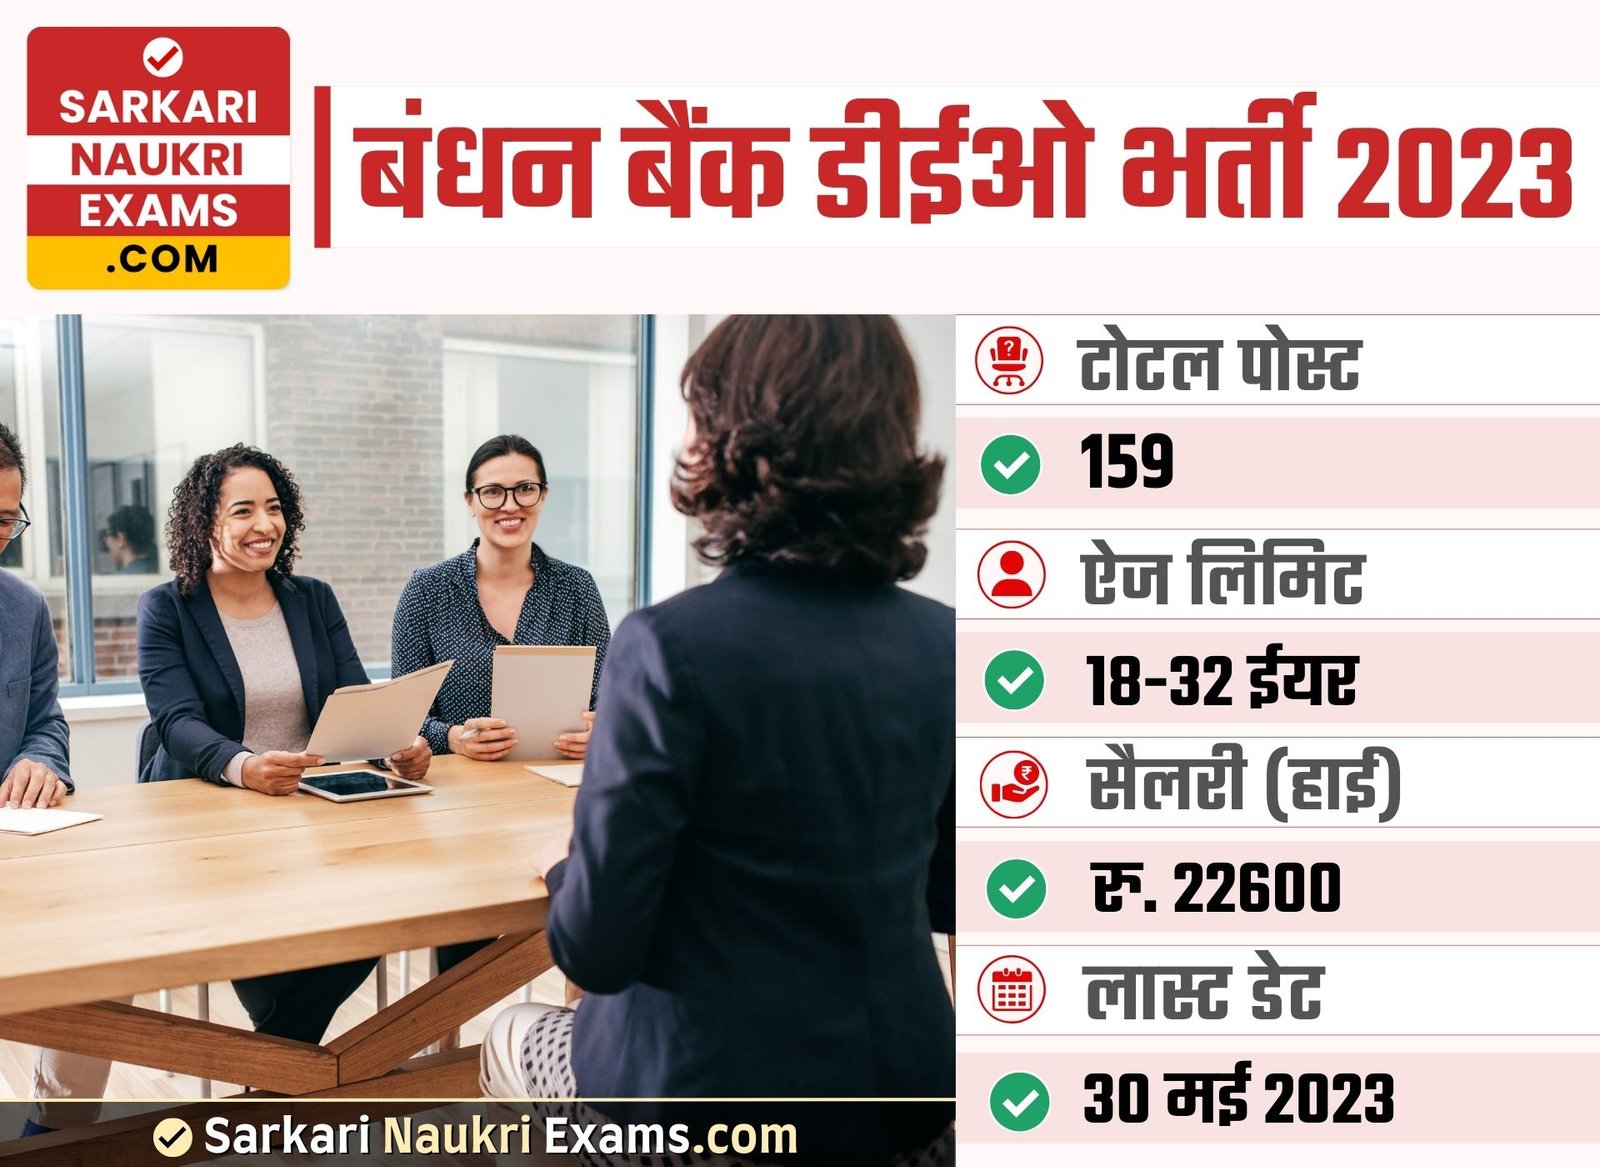 Bandhan Bank Data Entry Operator (DEO) Recruitment 2023 | Salary Upto 22600/- Online Form